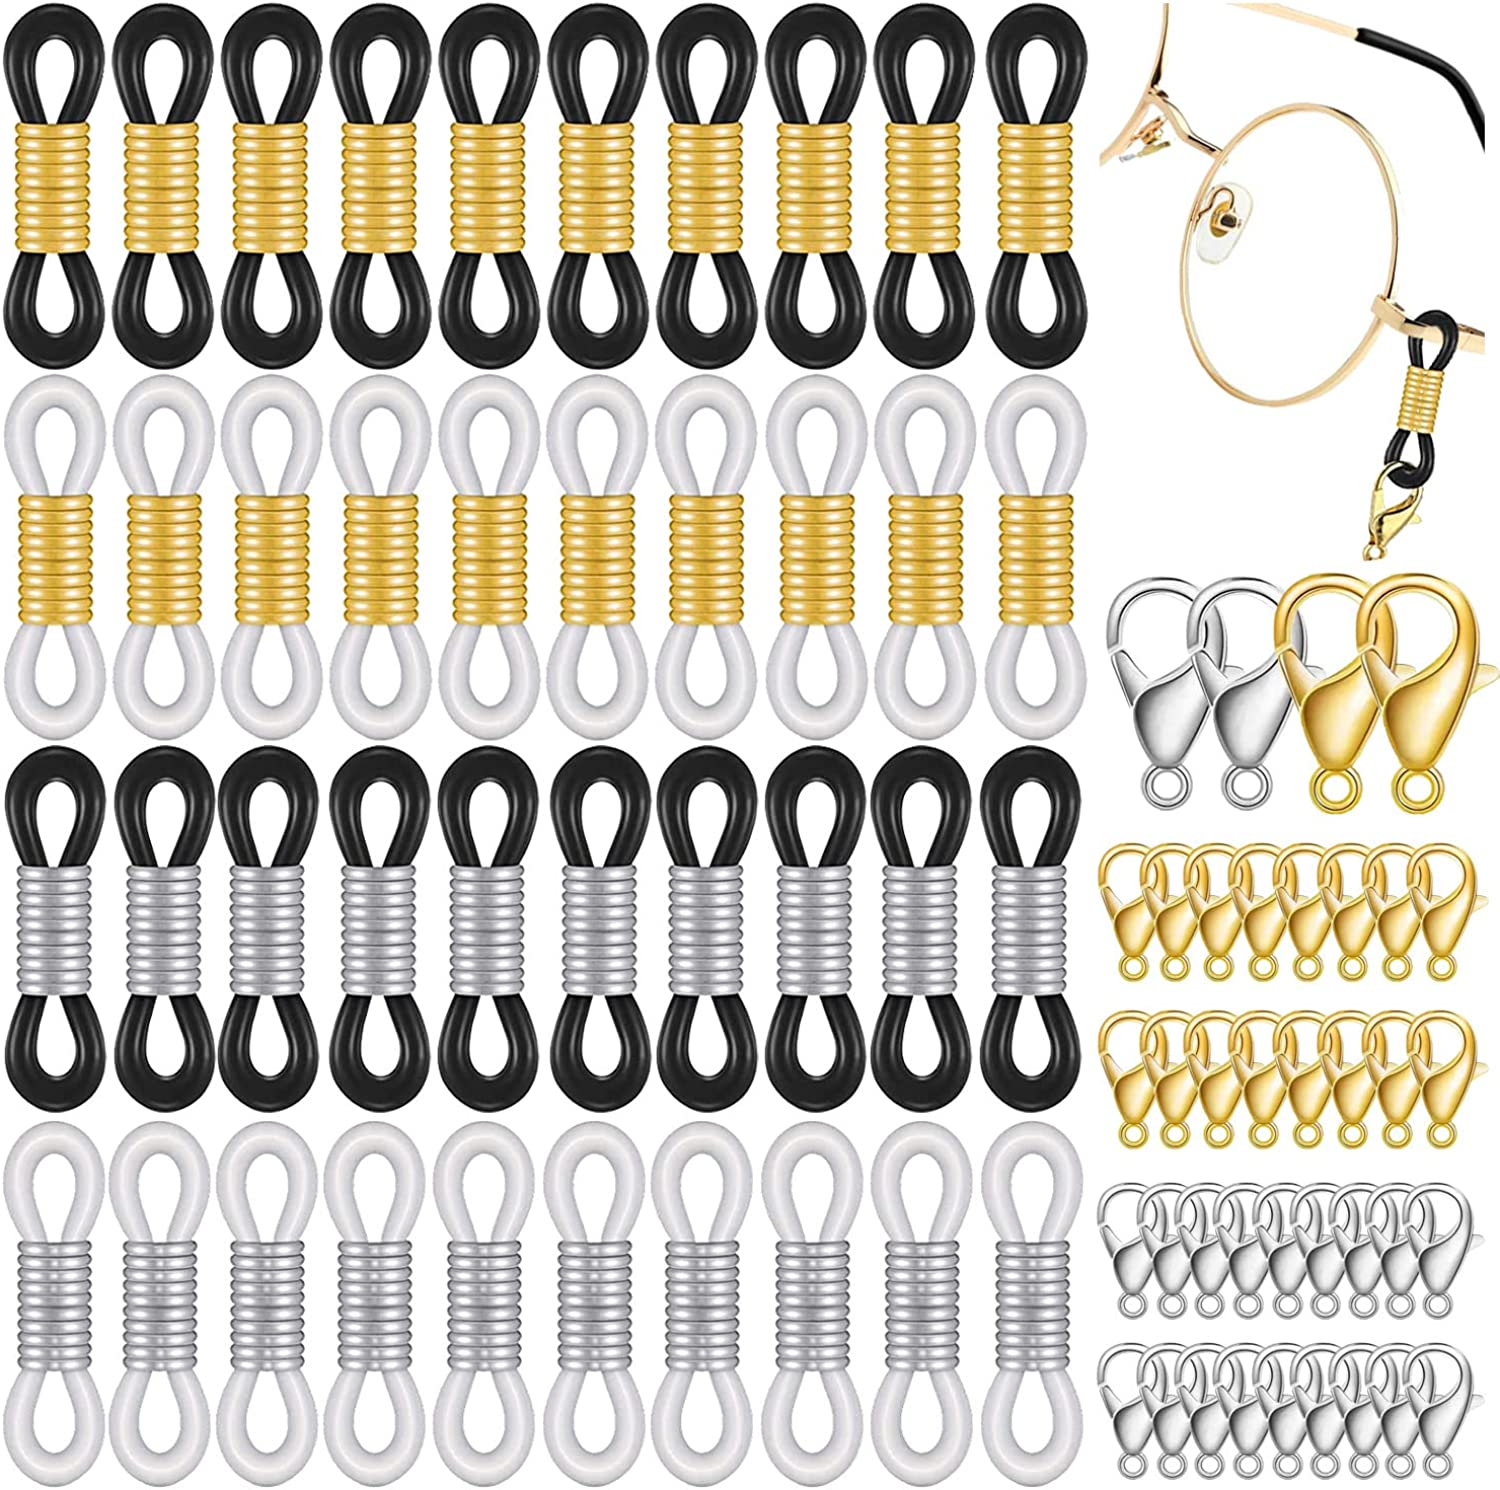 Eyeglass Chain Ends, Eyeglass Chain Connector, 200 Pieces Adjustable Spring  Rubber Ends Connectors, 100 Lobster Clasp for Glasses Strap, Glasses  Holder, Sunglasses strap, Face mask Connector 